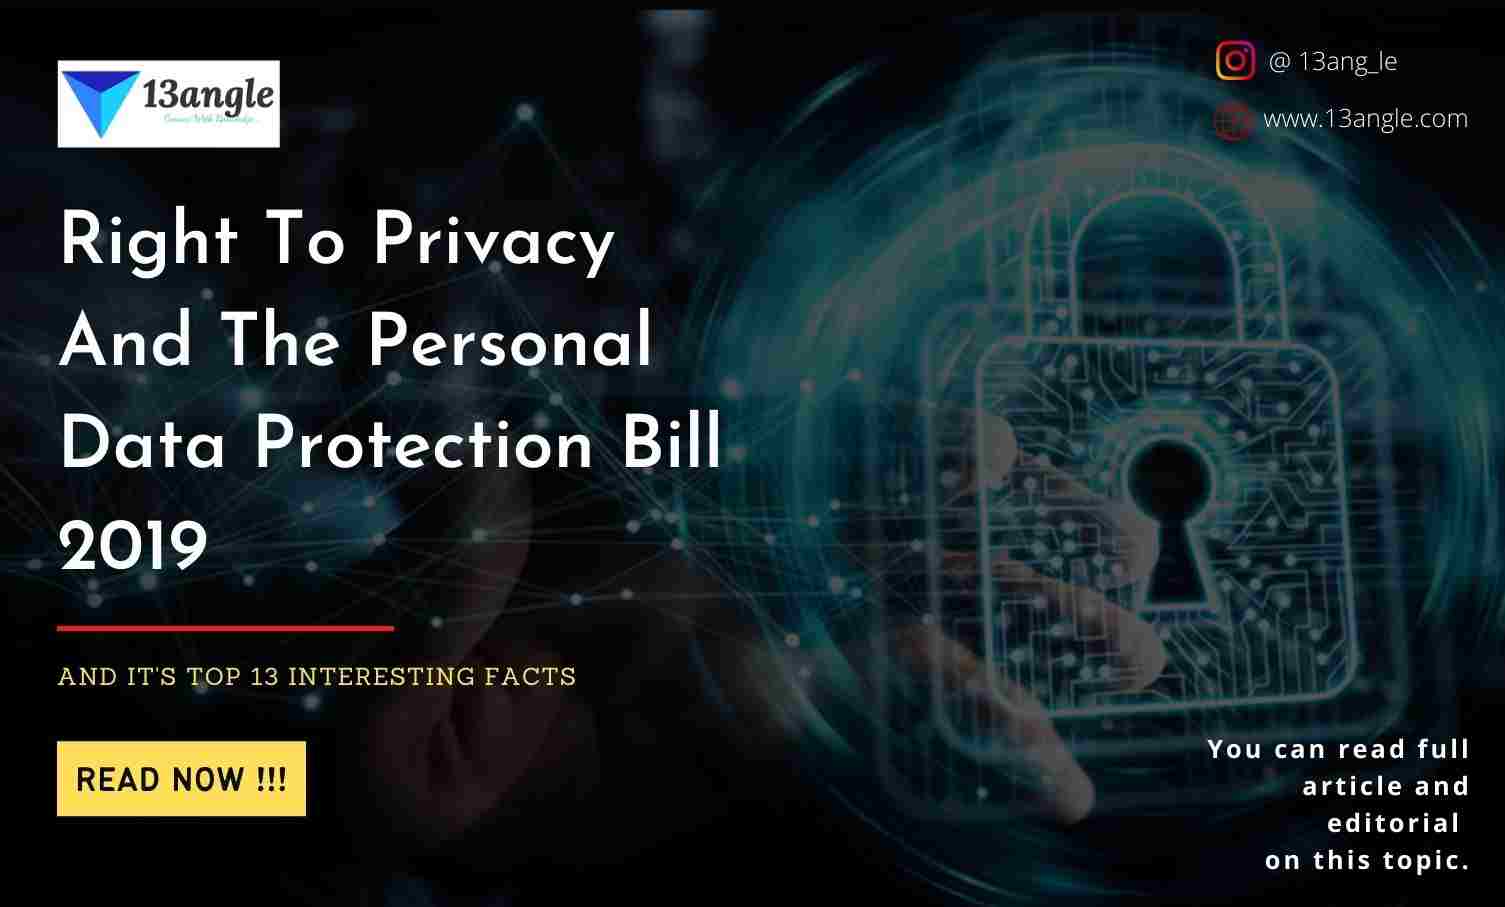 Right To Privacy And The Personal Data Protection Bill 2019- 13angle.com